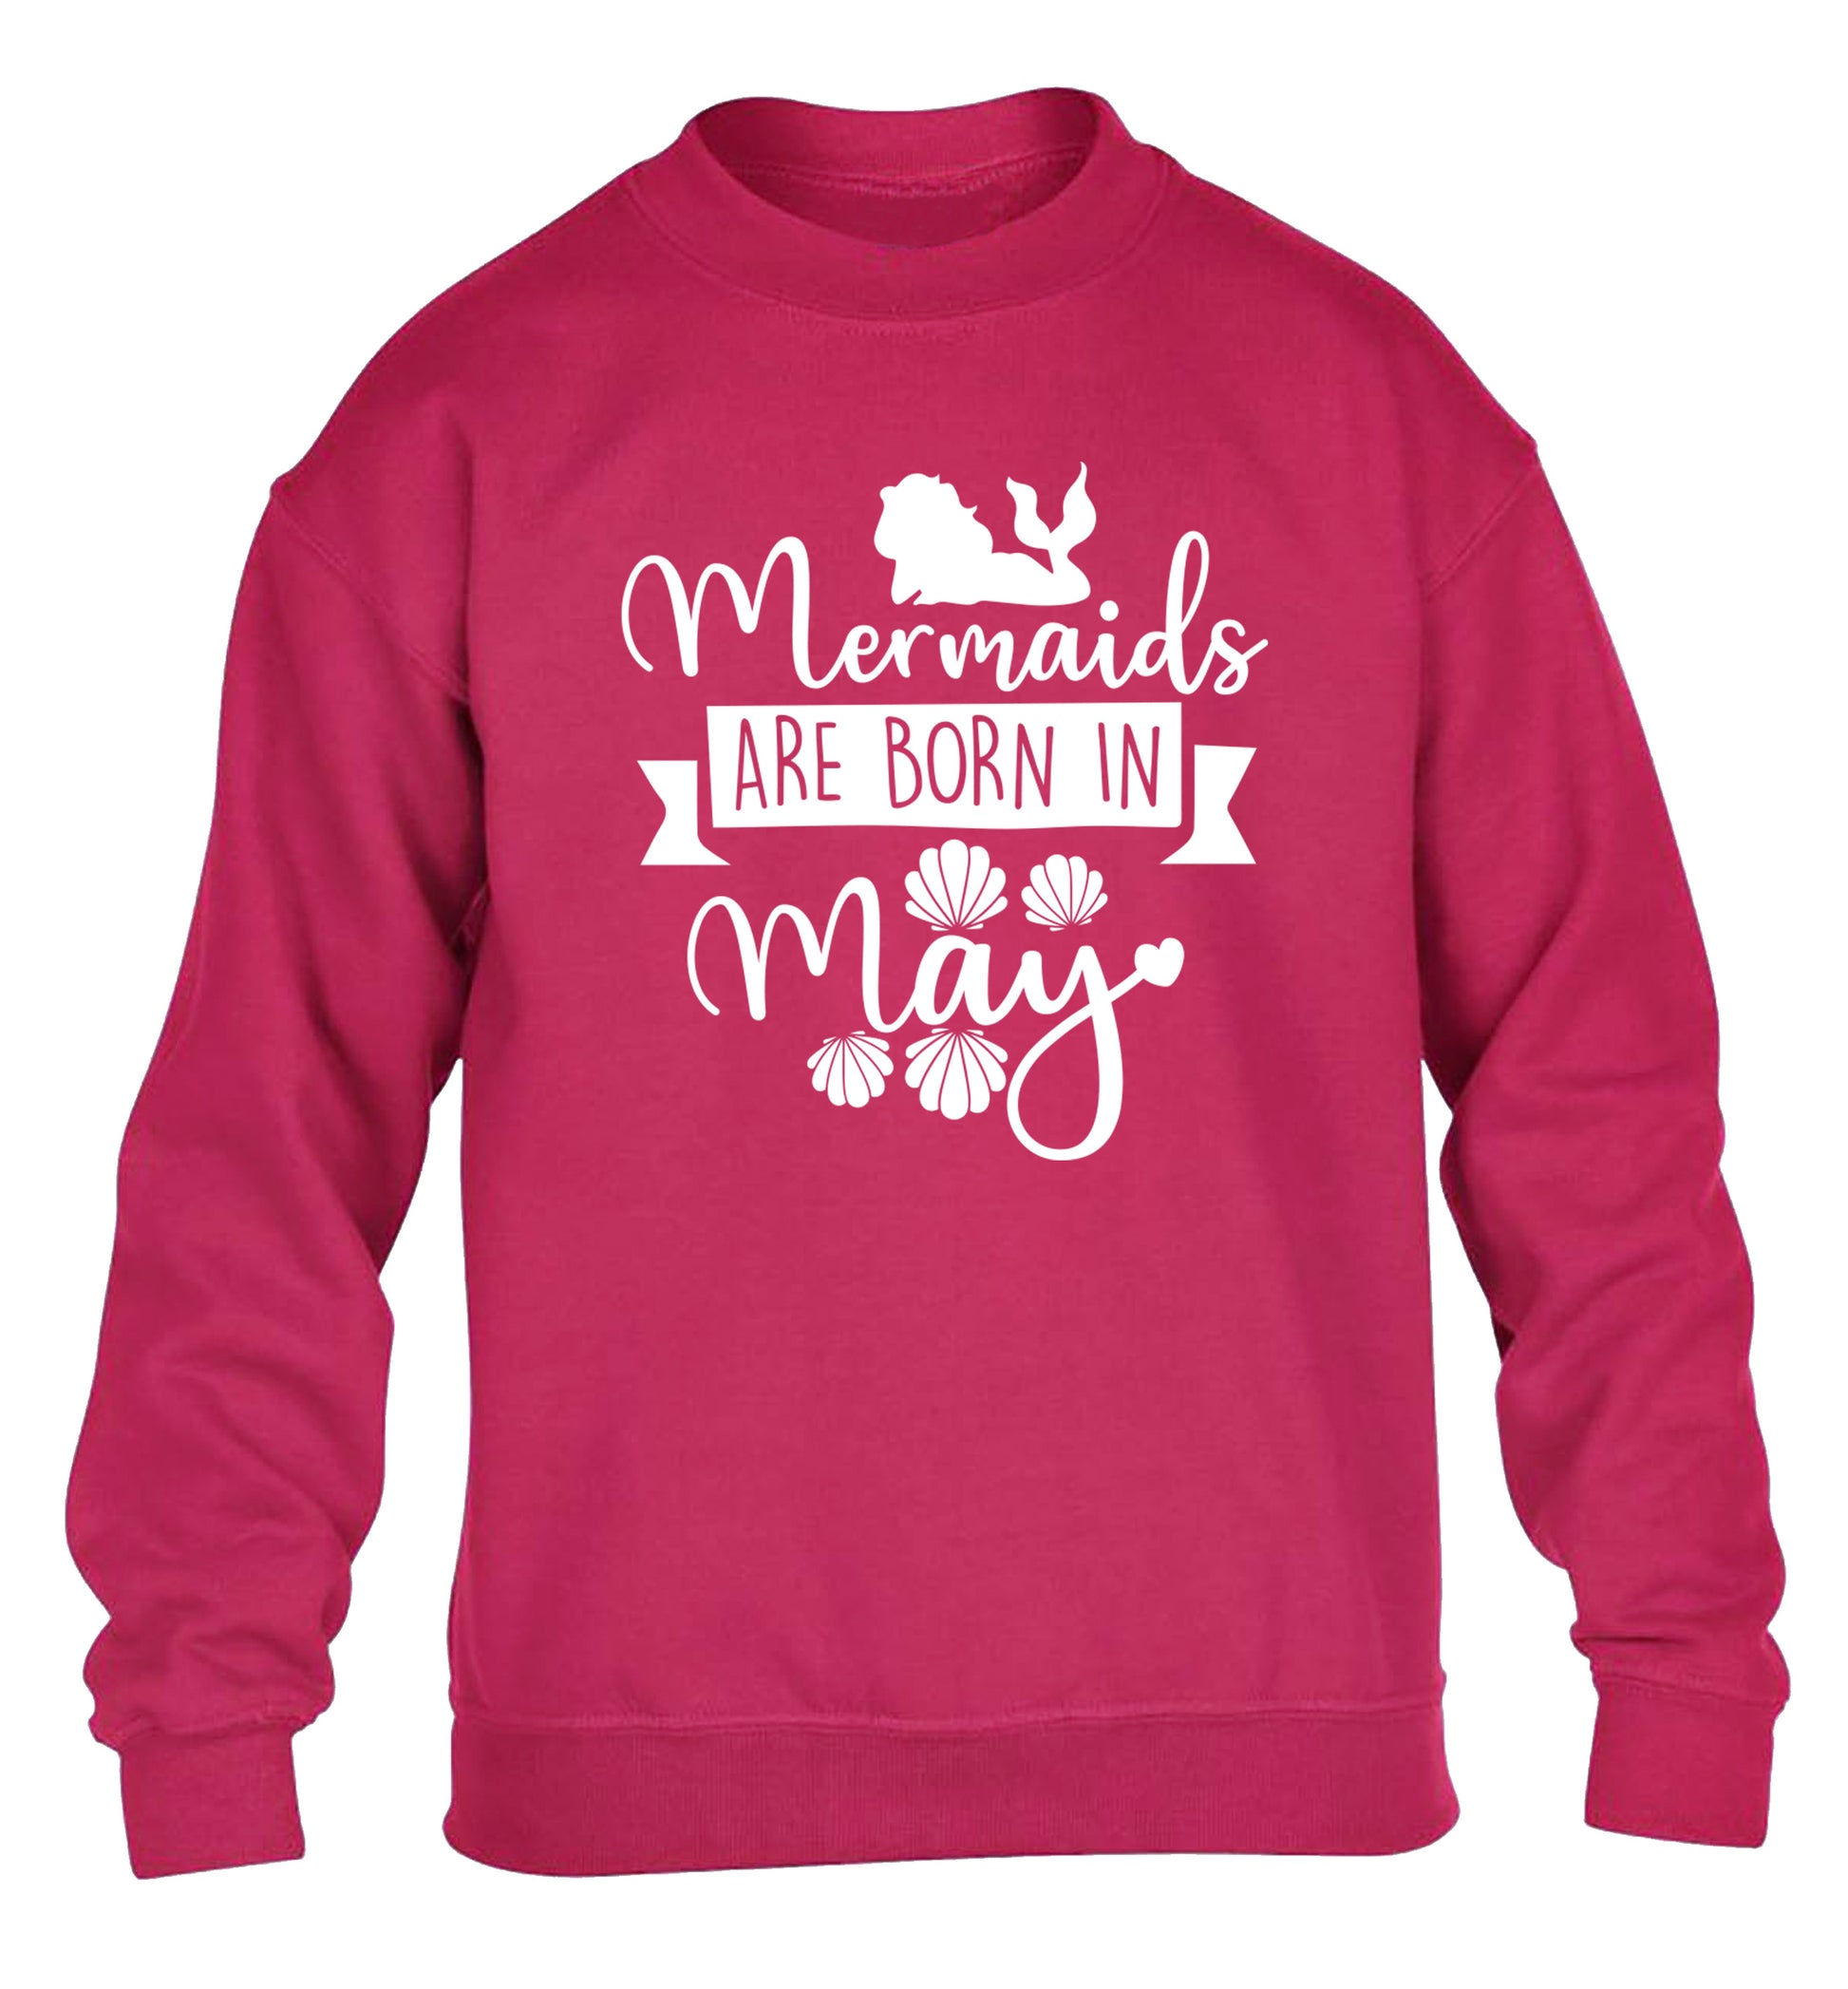 Mermaids are born in May children's pink sweater 12-13 Years